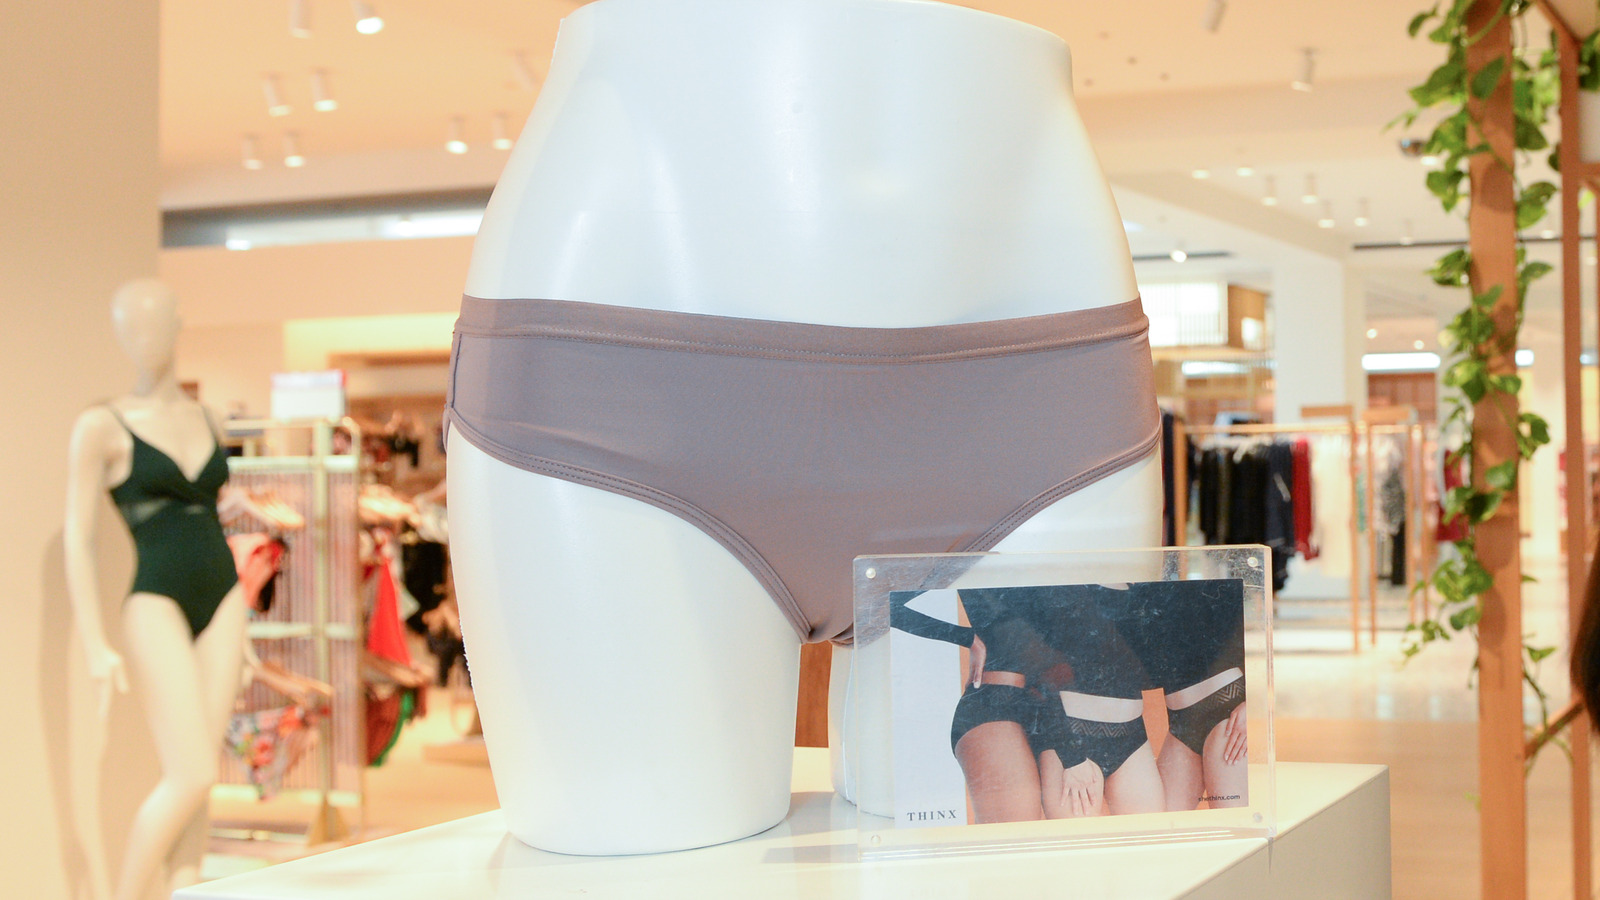 Period Panties: The Newest Way To Deal With Your Period 